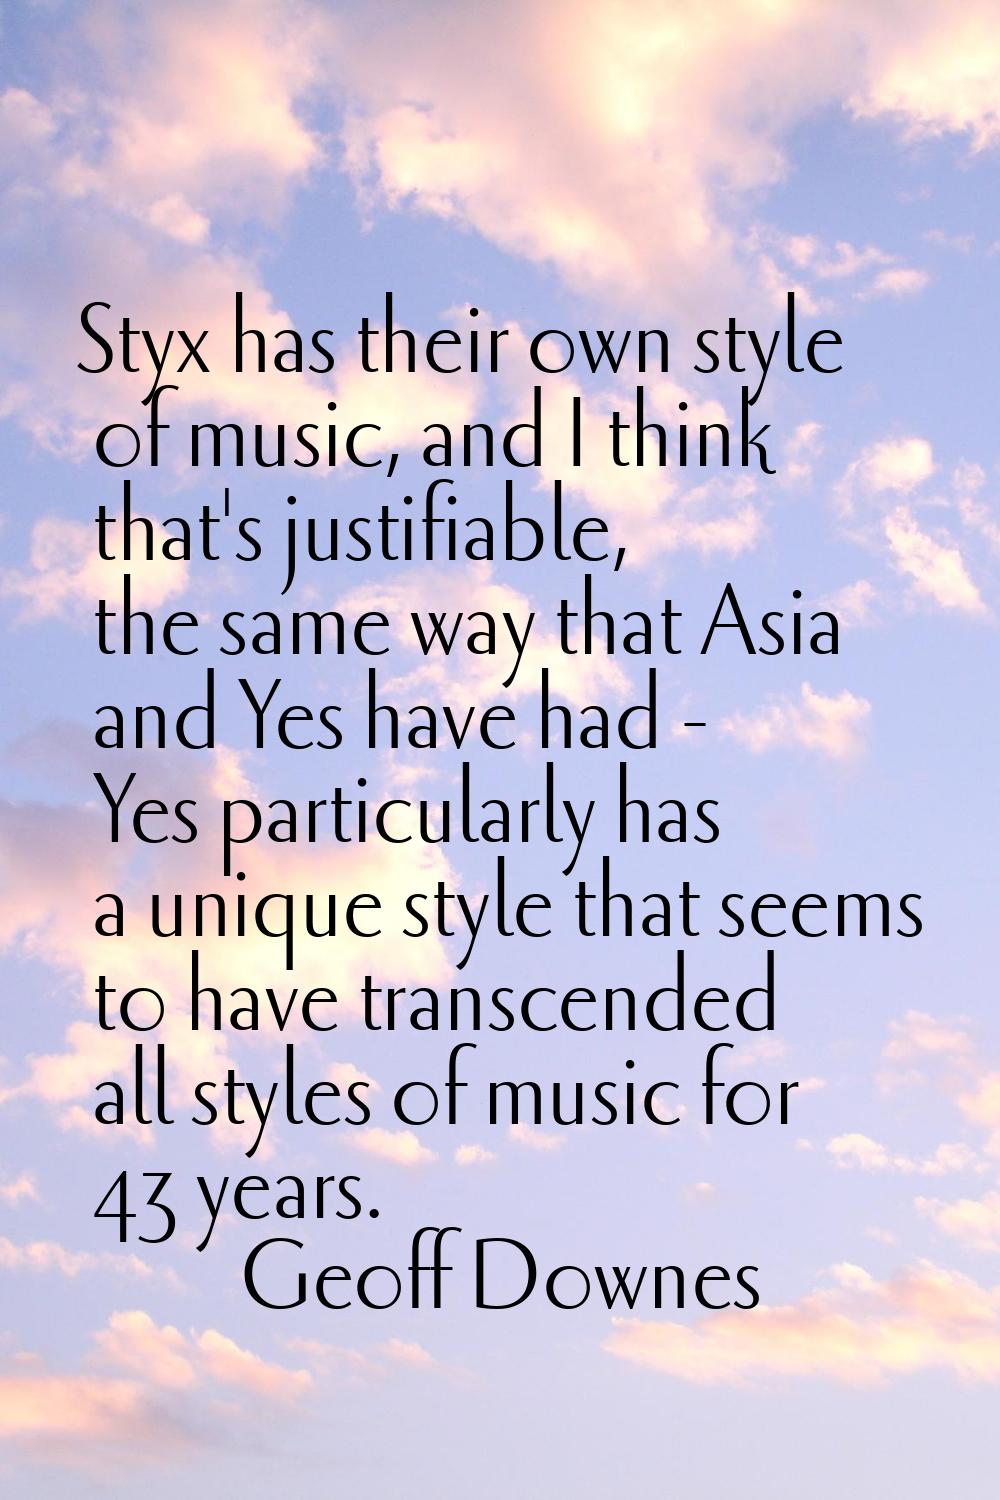 Styx has their own style of music, and I think that's justifiable, the same way that Asia and Yes h